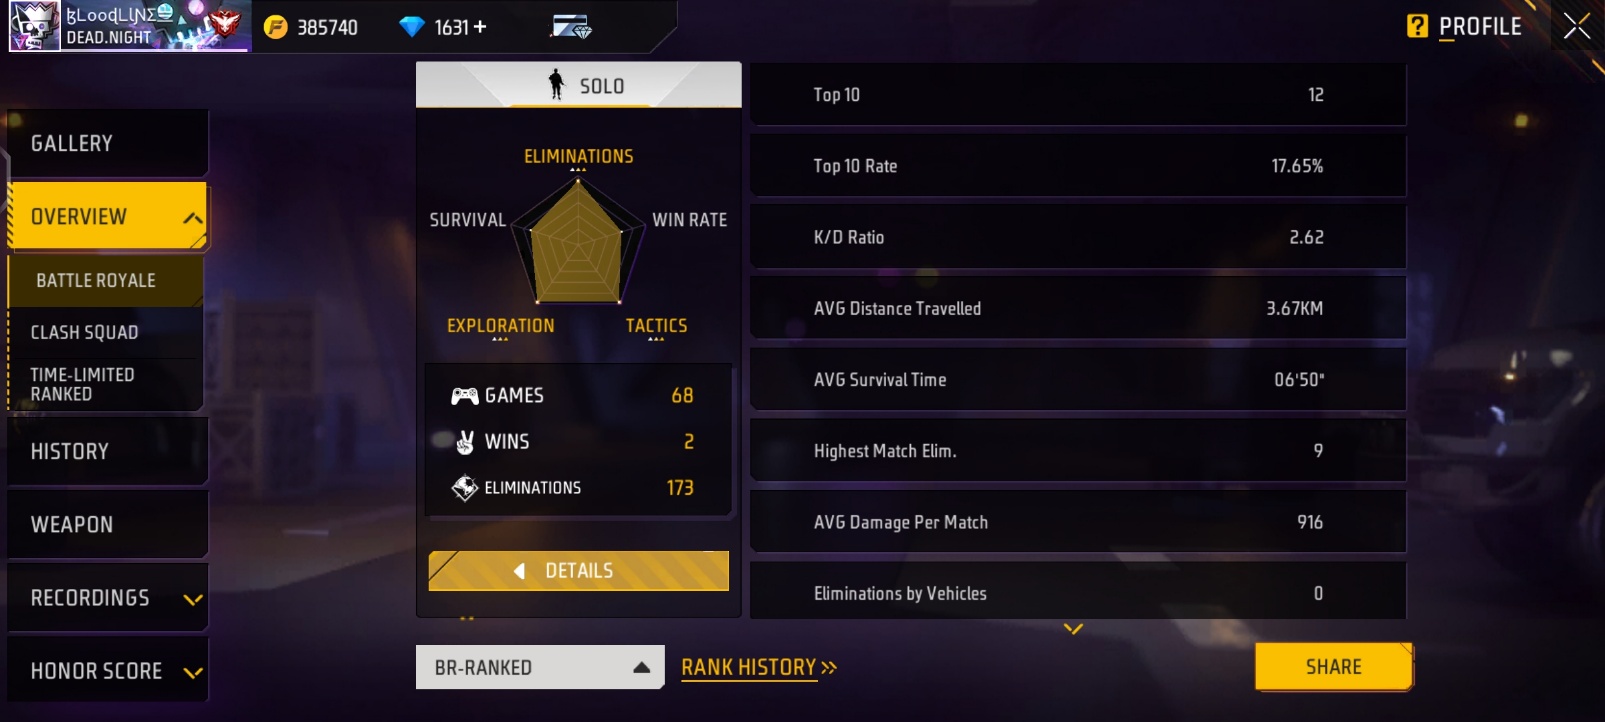 What Is KD Ratio In Free Fire Max And How Is It Calculated?